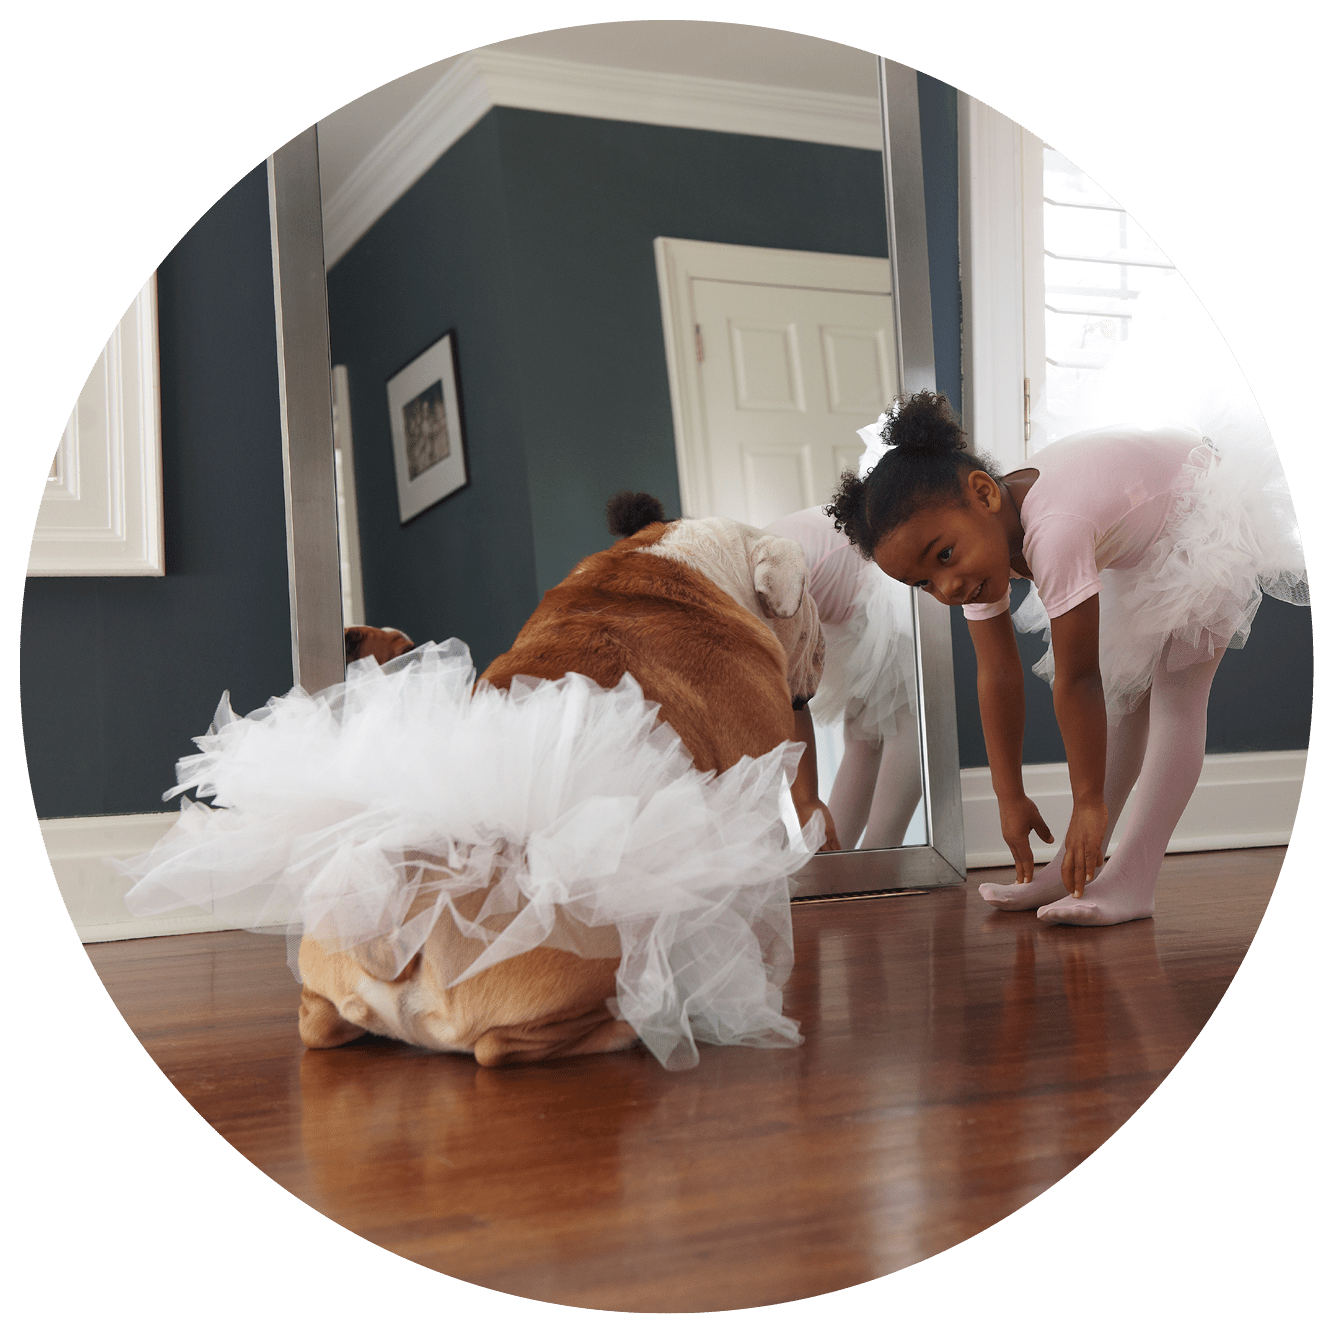 Girl in a ballerina outfit touching her toes and looking up at her dog